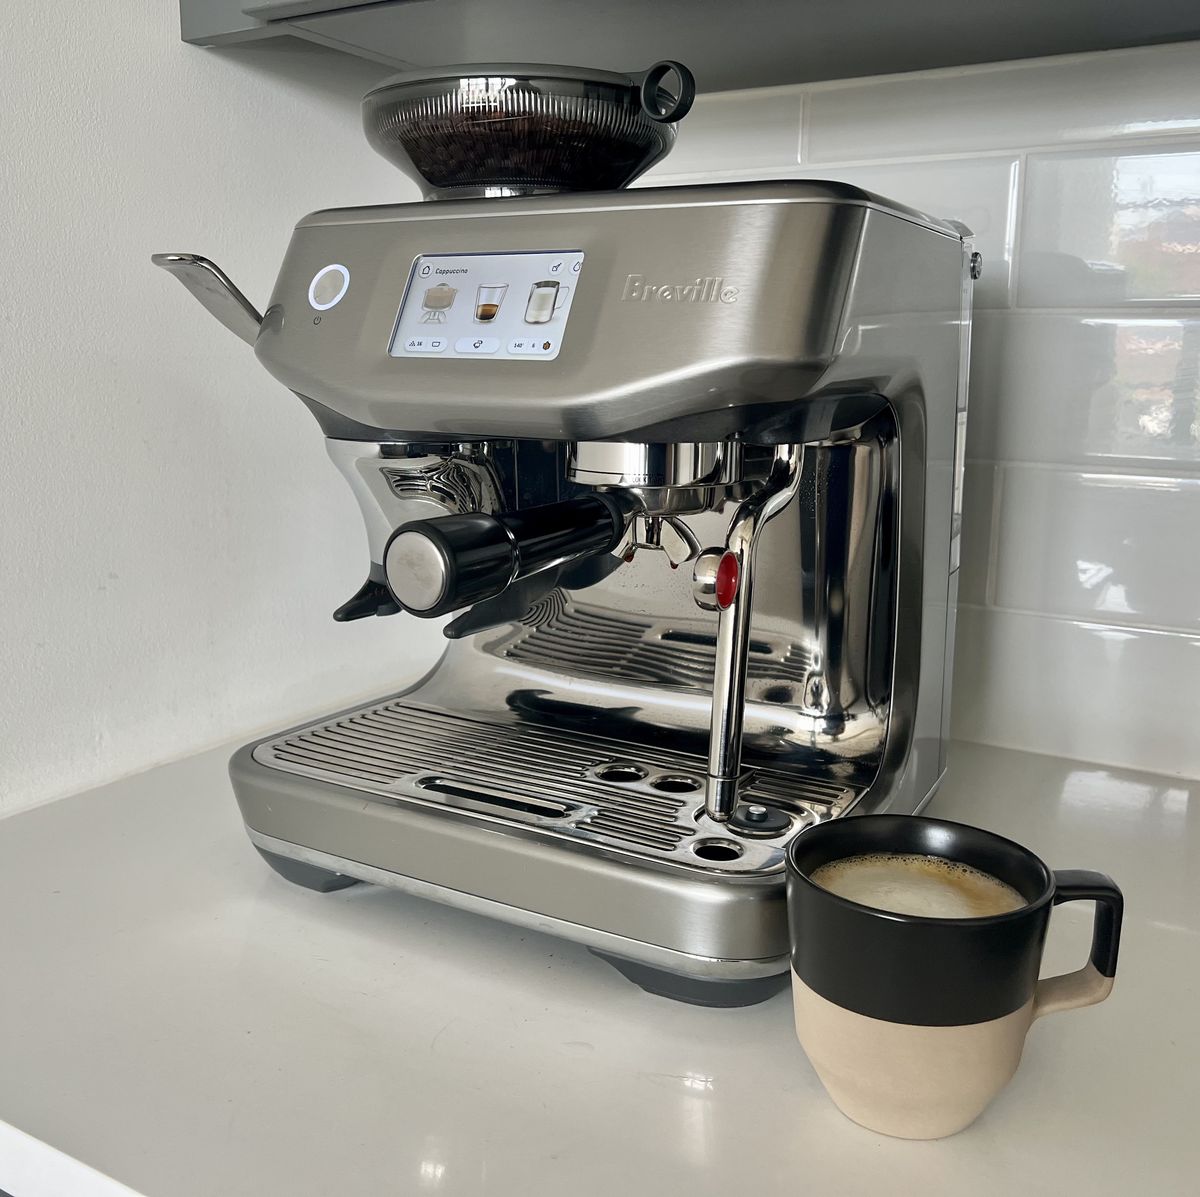 https://hips.hearstapps.com/hmg-prod.s3.amazonaws.com/images/breville-barista-touch-impress-lead-64d15e6aea099.jpg?crop=0.752xw:1.00xh;0.125xw,0&resize=1200:*